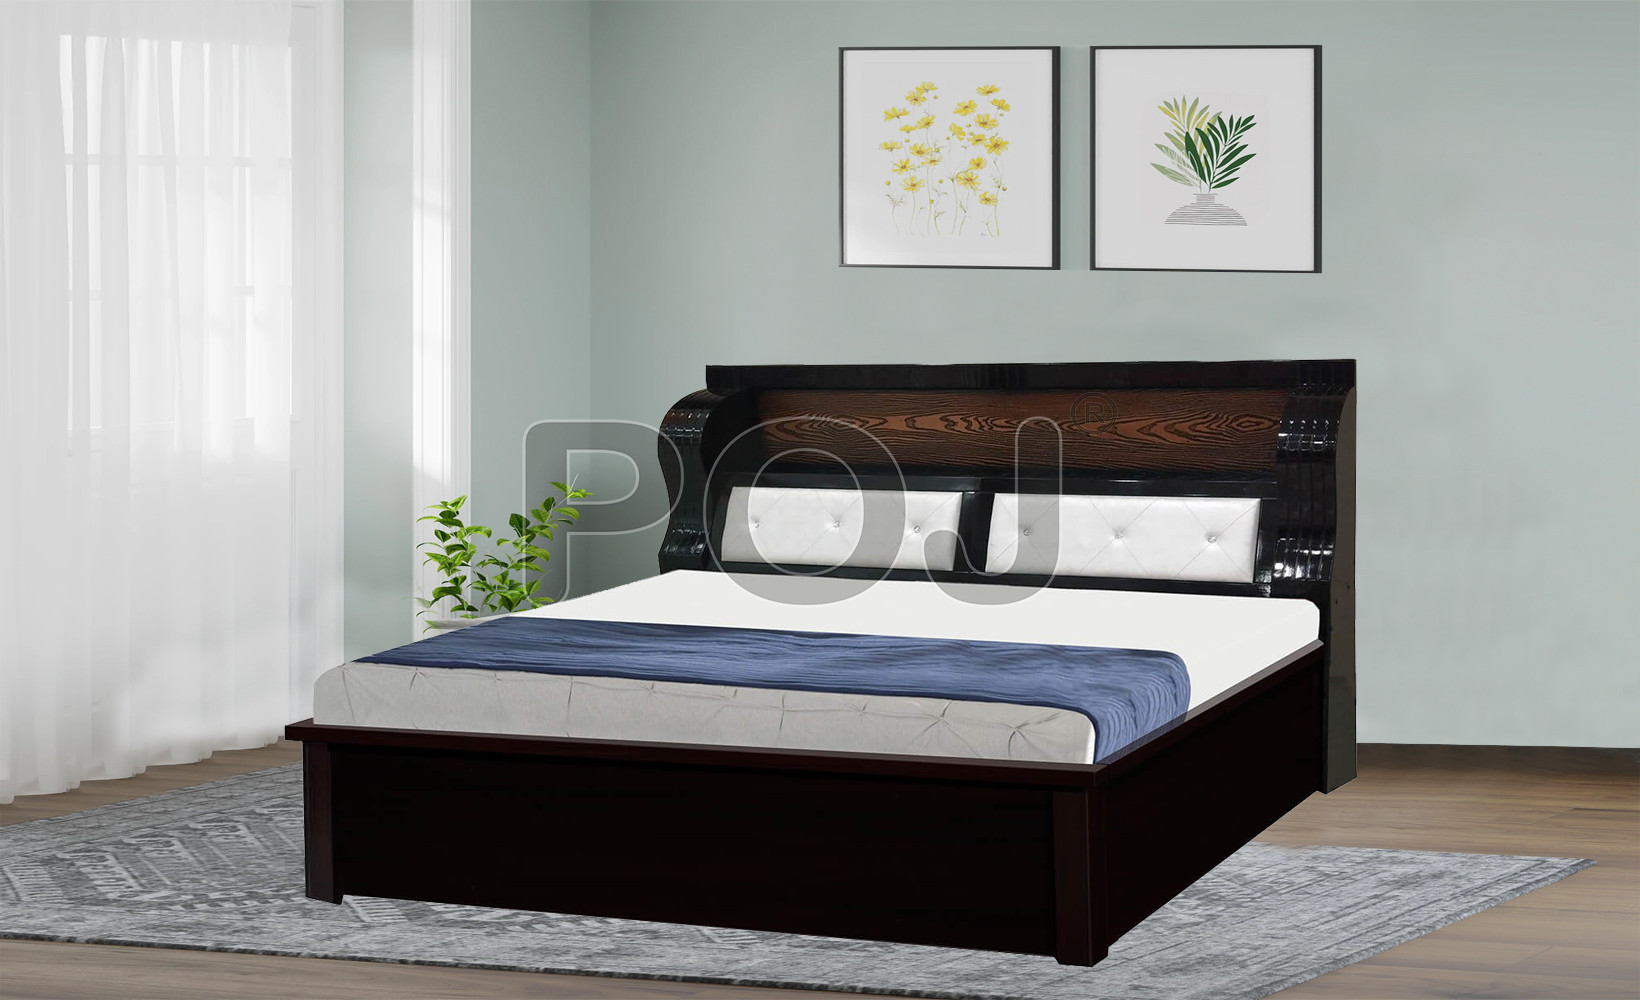 Ava Queen Size Bed With Full Hydraulic Storage In Walnut Finish